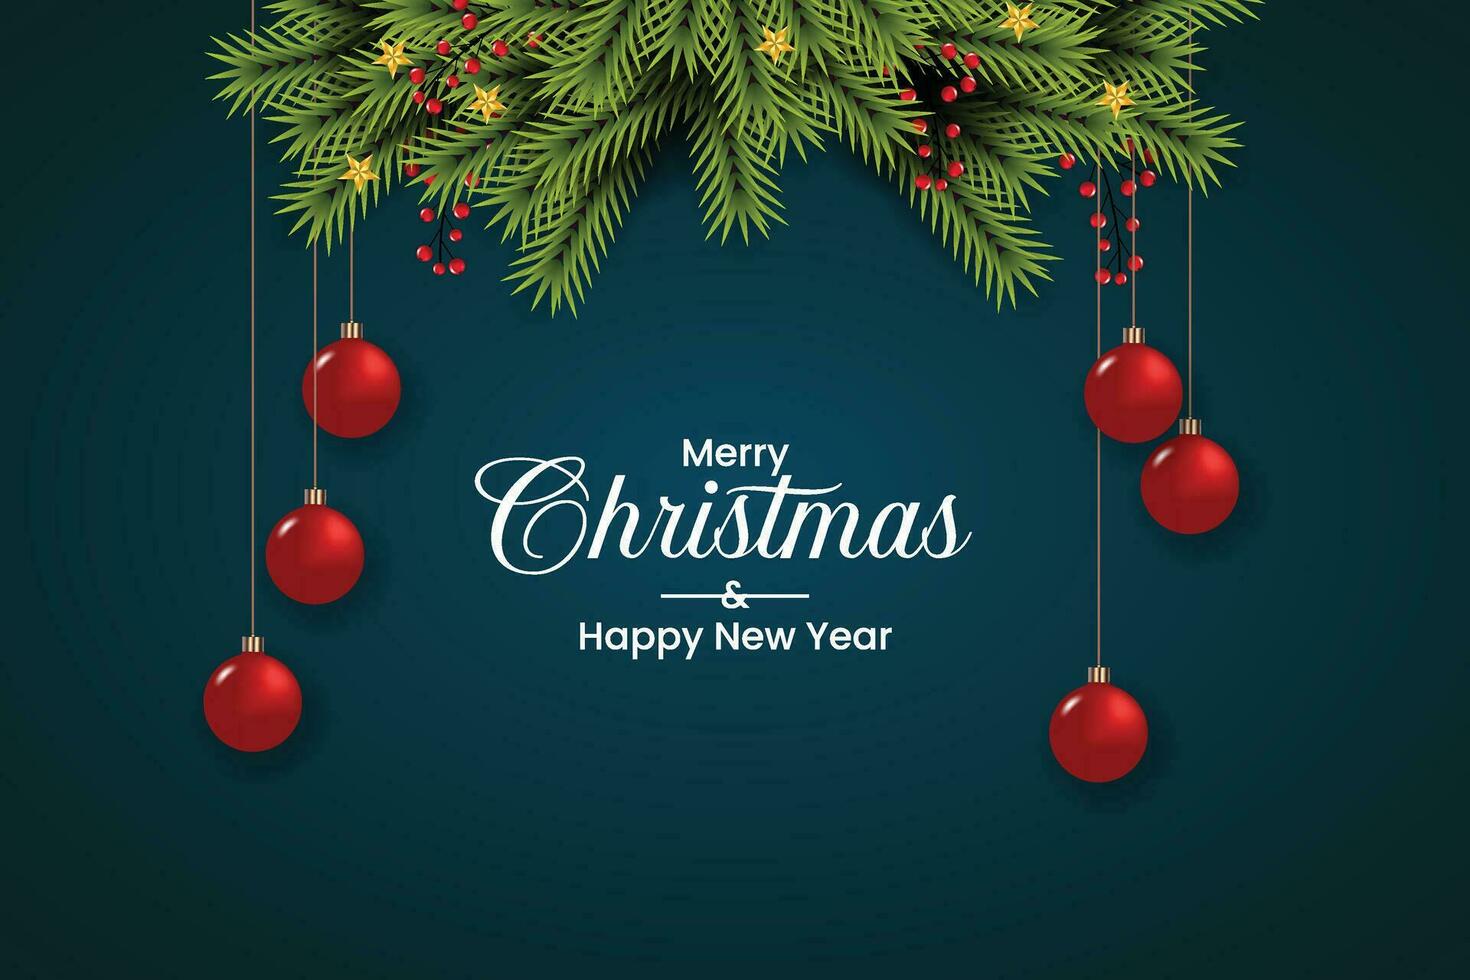 Merry Christmas background with pine branch,christmas ball and christmas element Vector illustration